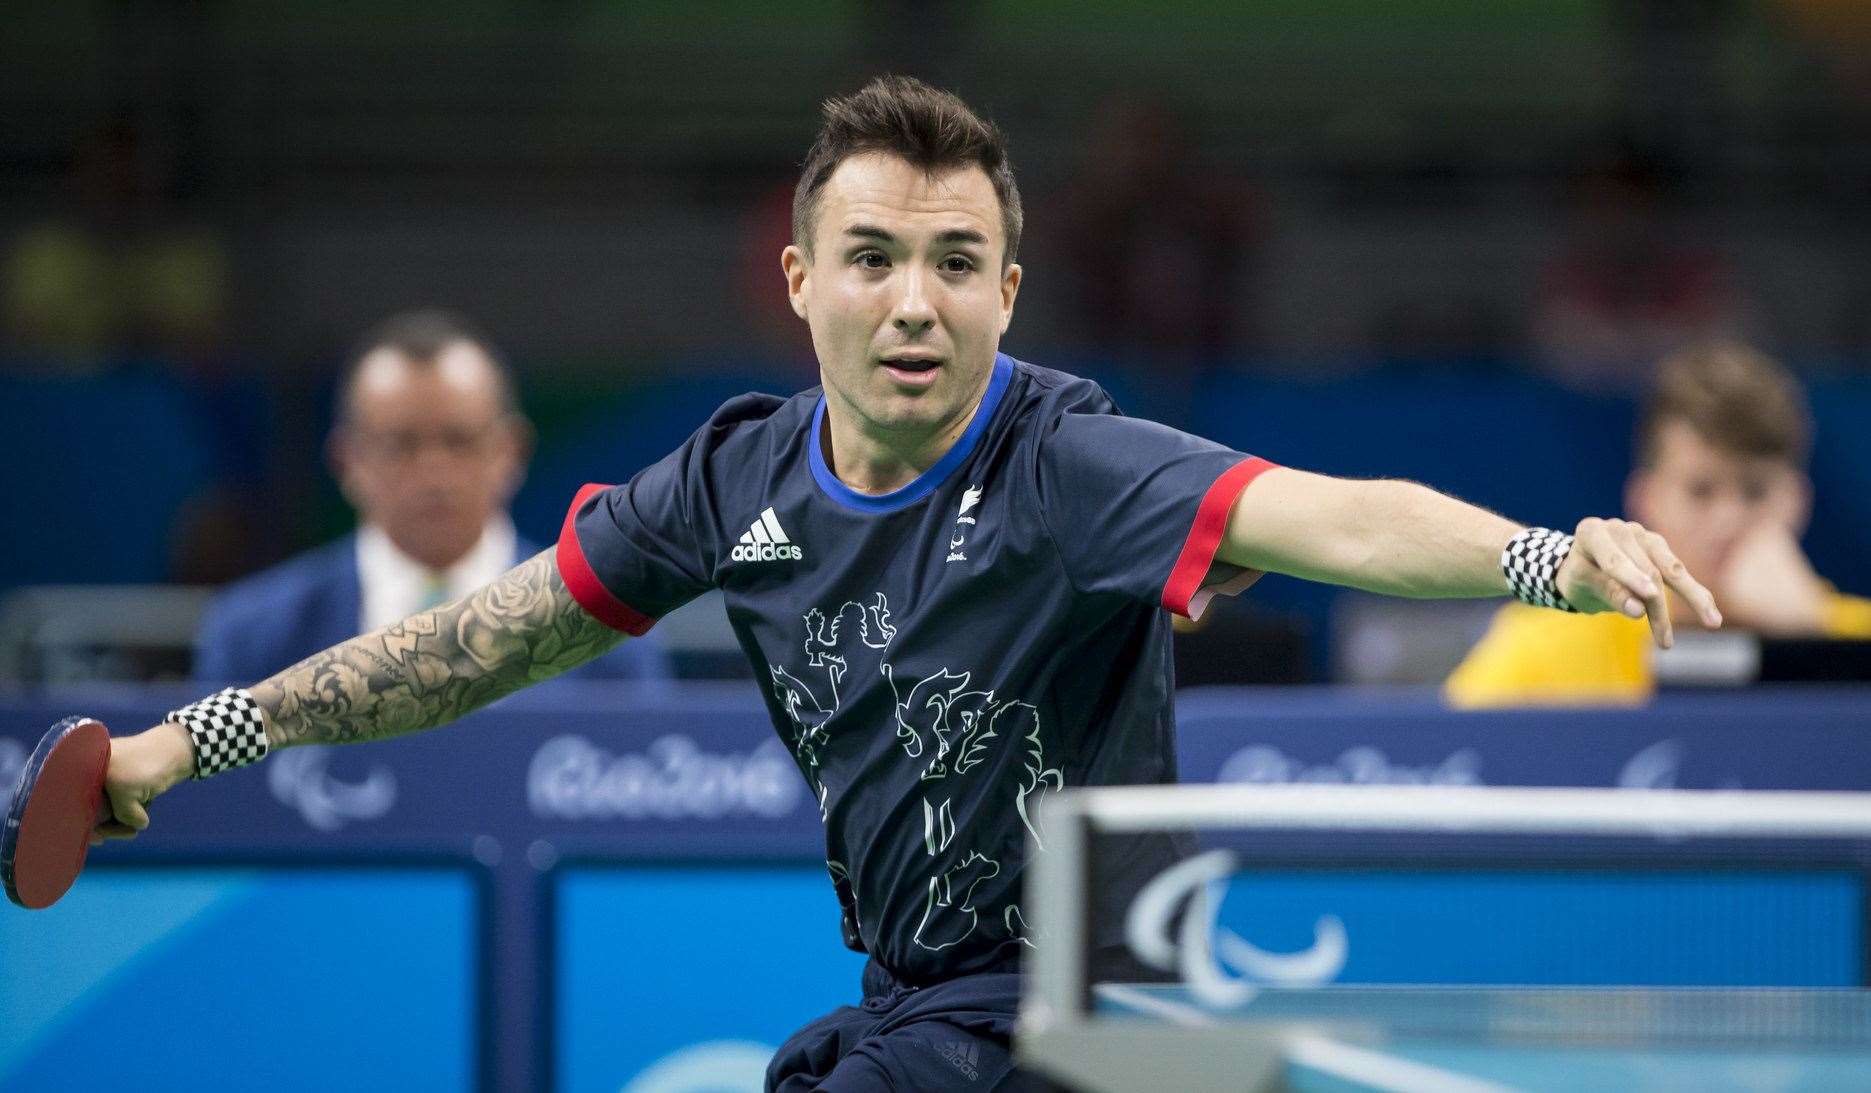 Table tennis player Will Bayley won another Paralympics medal with silver in Tokyo. Picture: onEdition Media/sportsbeat